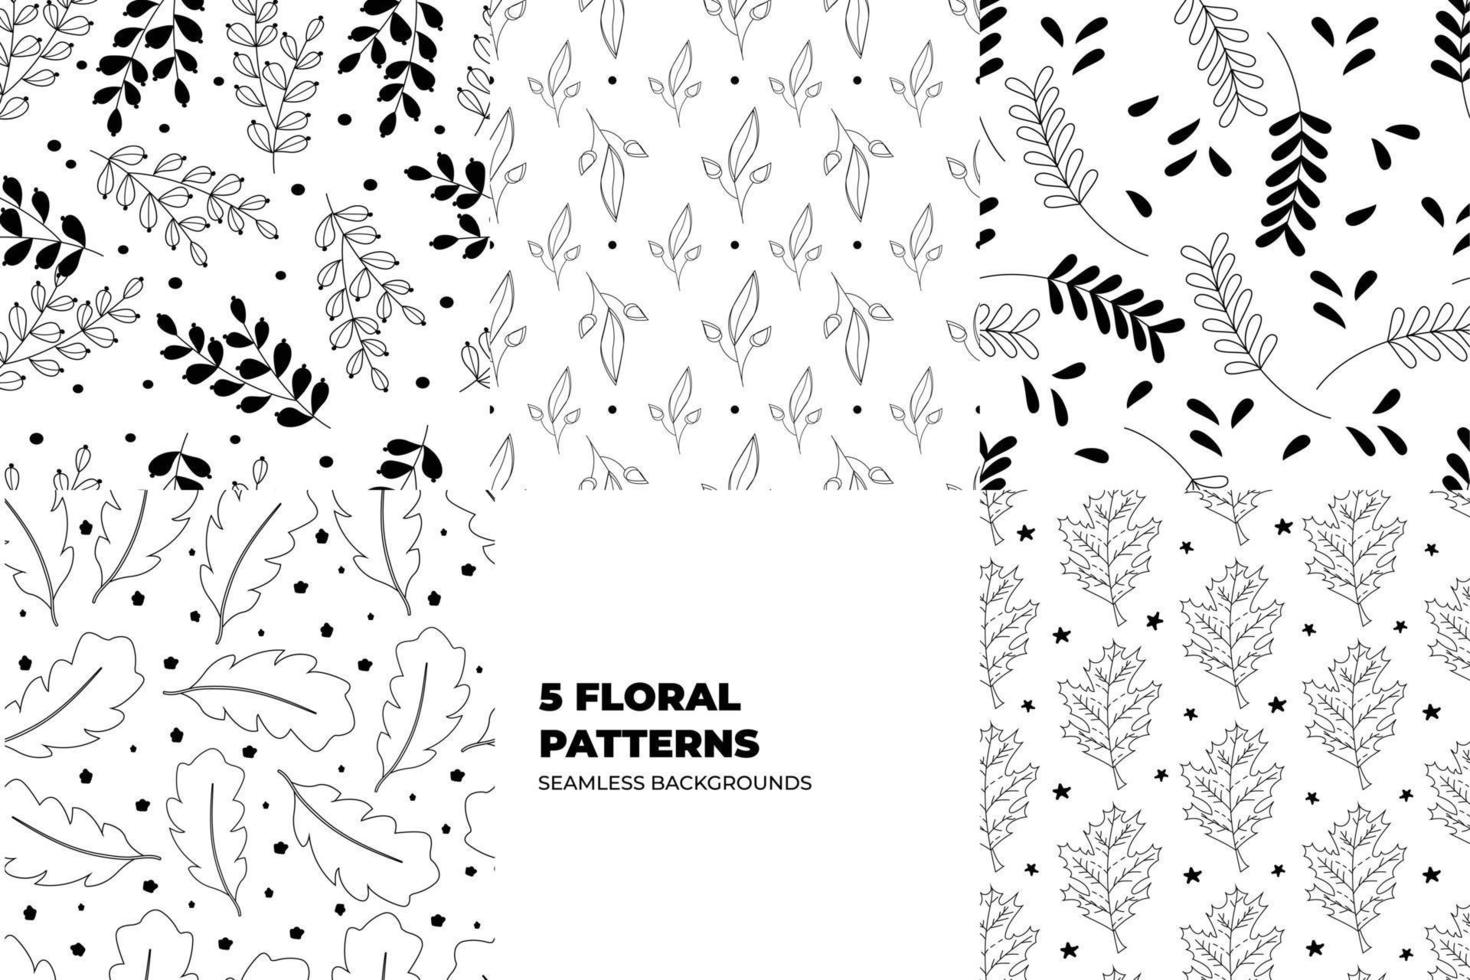 Floral seamless patterns. Leaves and flowers in black and white tones. Repeating vector design for paper, cover, fabric, interior decor and textile users. Vector illustration.